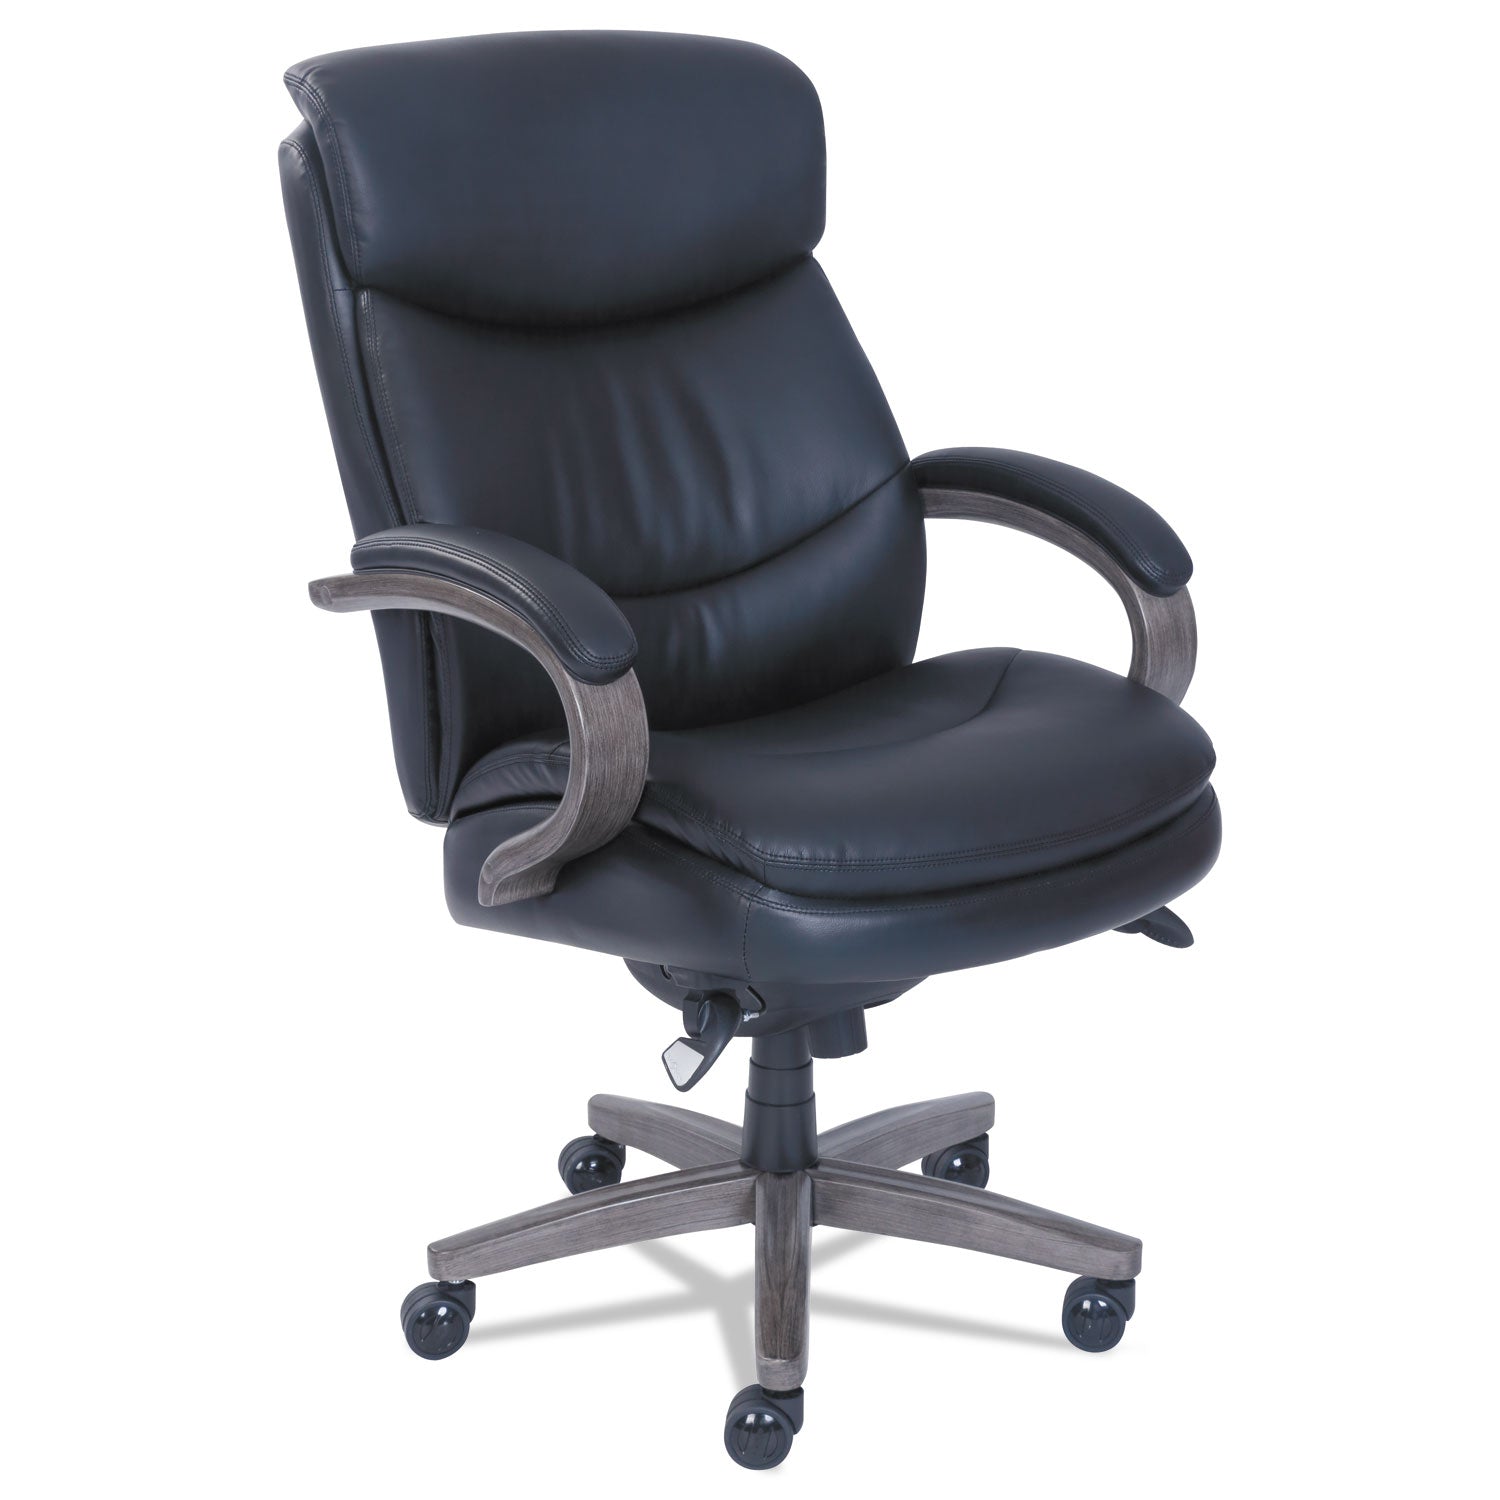 woodbury-high-back-executive-chair-supports-up-to-300-lb-2025-to-2325-seat-height-black-seat-back-weathered-gray-base_lzb48962a - 1